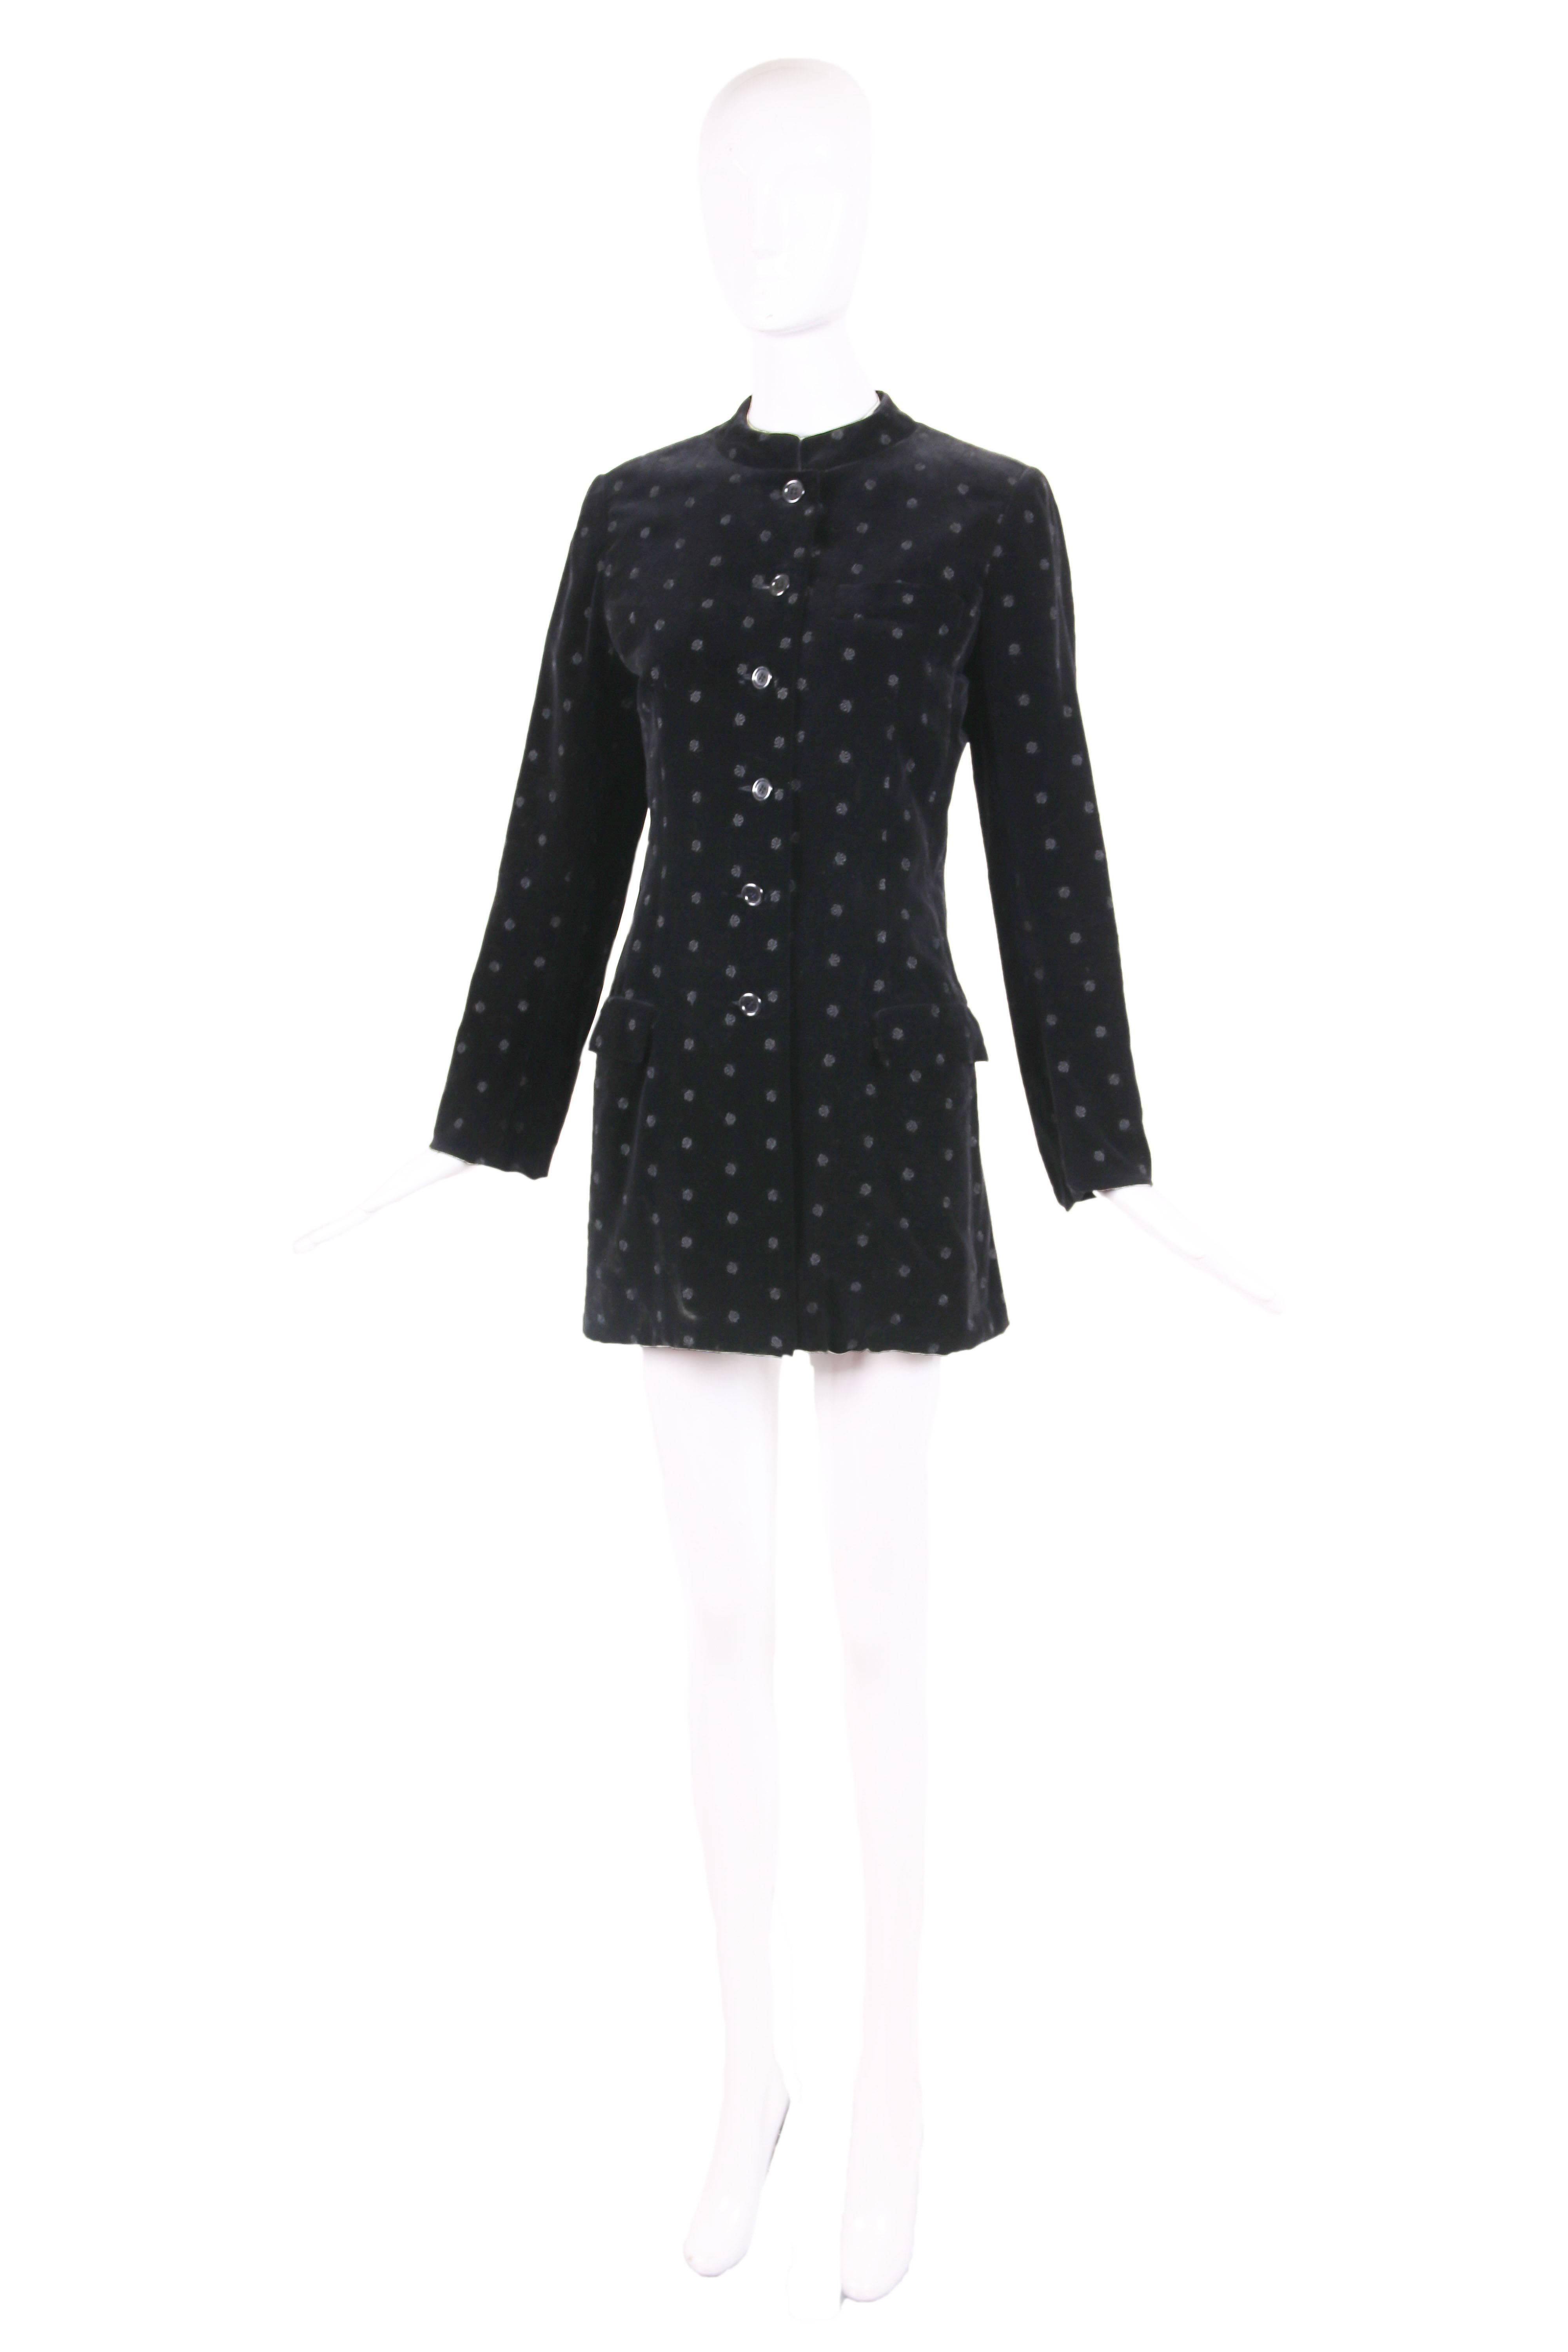 1970's Yves Saint Laurent black velvet jacket with Nehru collar and rose pattern. Jacket buttons down center front and features two flap pockets at the bodice front below the waist and one breast pocket. There is a vent at the back. In excellent